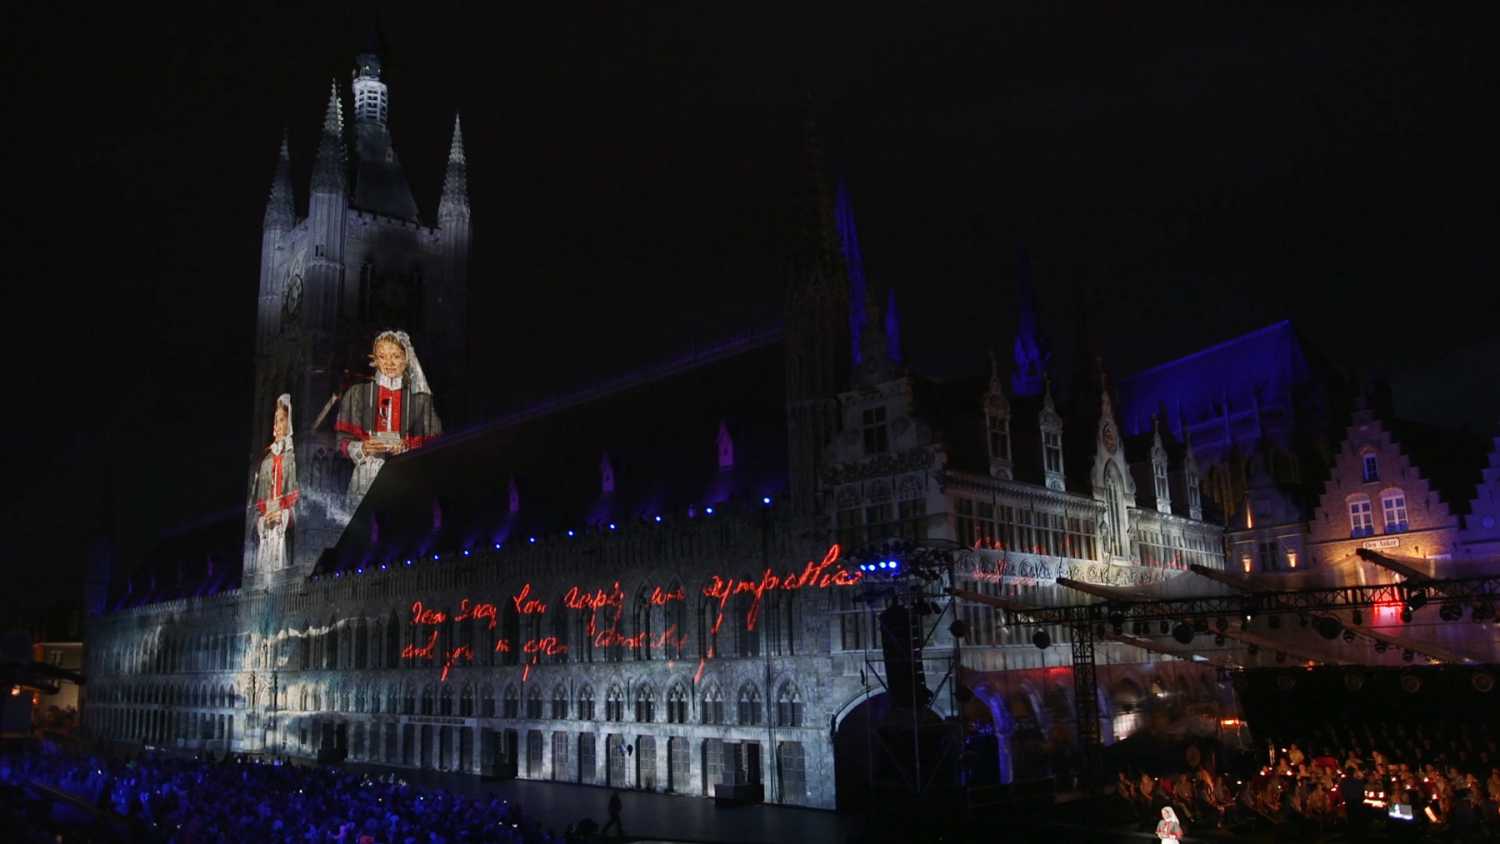 The historic Cloth Hall was illuminated with projection and light displays